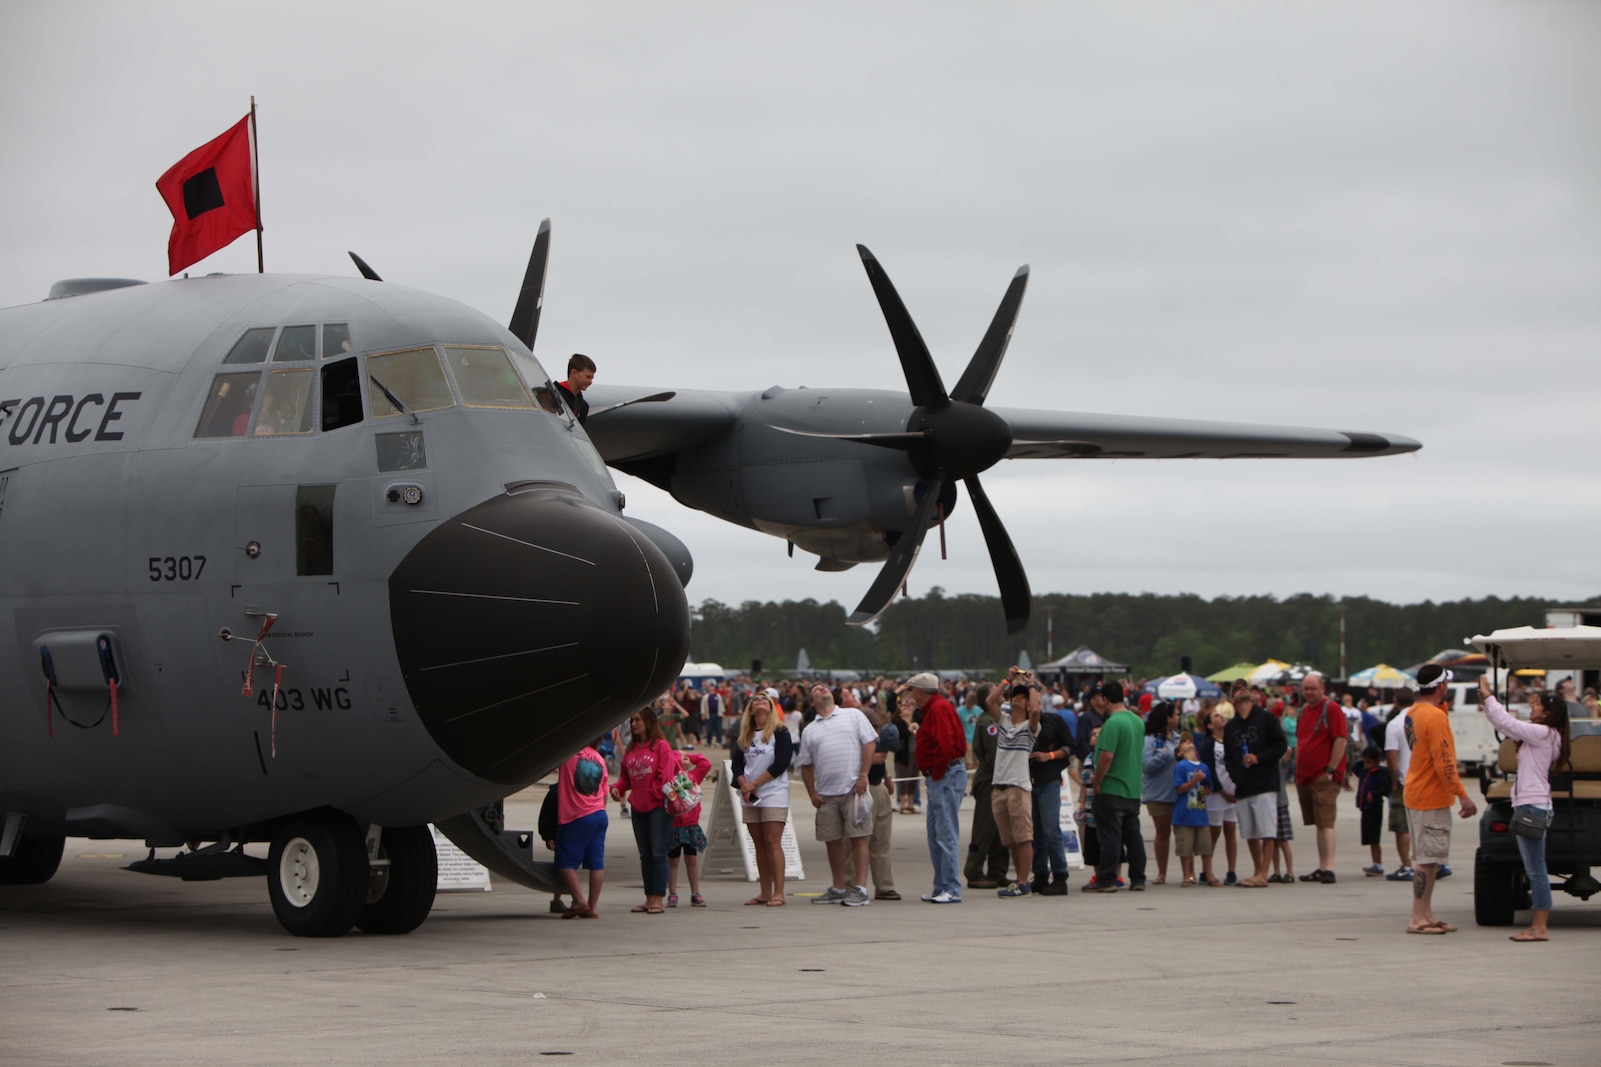 A WC-130 “Hurricane Hunter” is presented to a crowd at the 2016 Marine Corps Air Station Cherry Point Air Show – “Celebrating 75 Years” at MCAS Cherry Point, N.C., April 30, 2016. The WC-130 is a high-wing, medium-range aircraft used for weather reconnaissance missions by the United States Air Force. The aircraft is a modified version of the C-130 Hercules transport configured with specialized weather instrumentation used for penetration of tropical cyclones and winter storms to obtain data on movement, size and intensity.
This year’s air show celebrated MCAS Cherry Point and 2nd Marine Aircraft Wing’s 75th anniversaries and featured 40 static displays, 17 aerial performers and a concert.
#CPAirShow2016 #Marines
